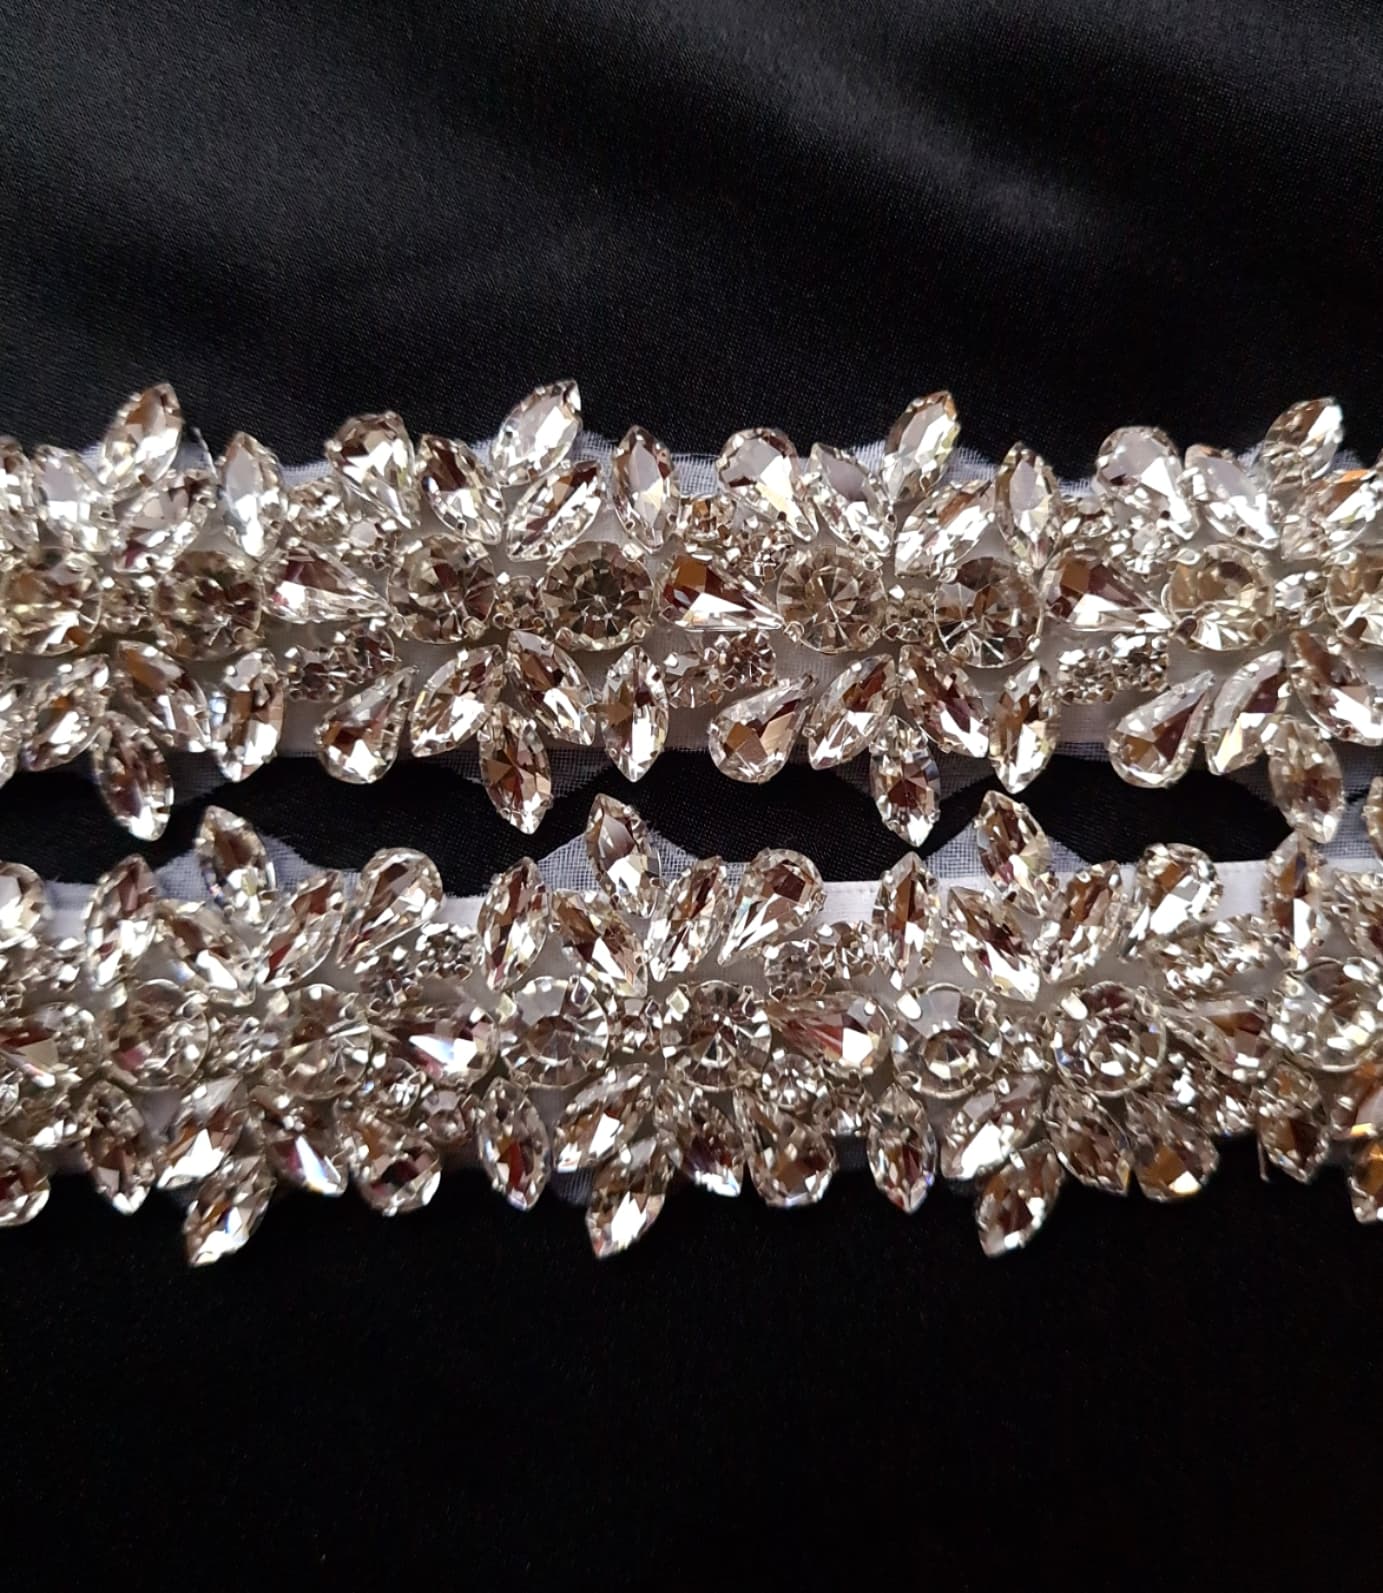 a close up view of A bridal belt with rhinestones and a white ribbon on a black background. The belt is made of satin and has a intricate design with rows of rhinestones. The rhinestones are sparkling and the belt is very shiny. The white ribbon adds a touch of elegance.